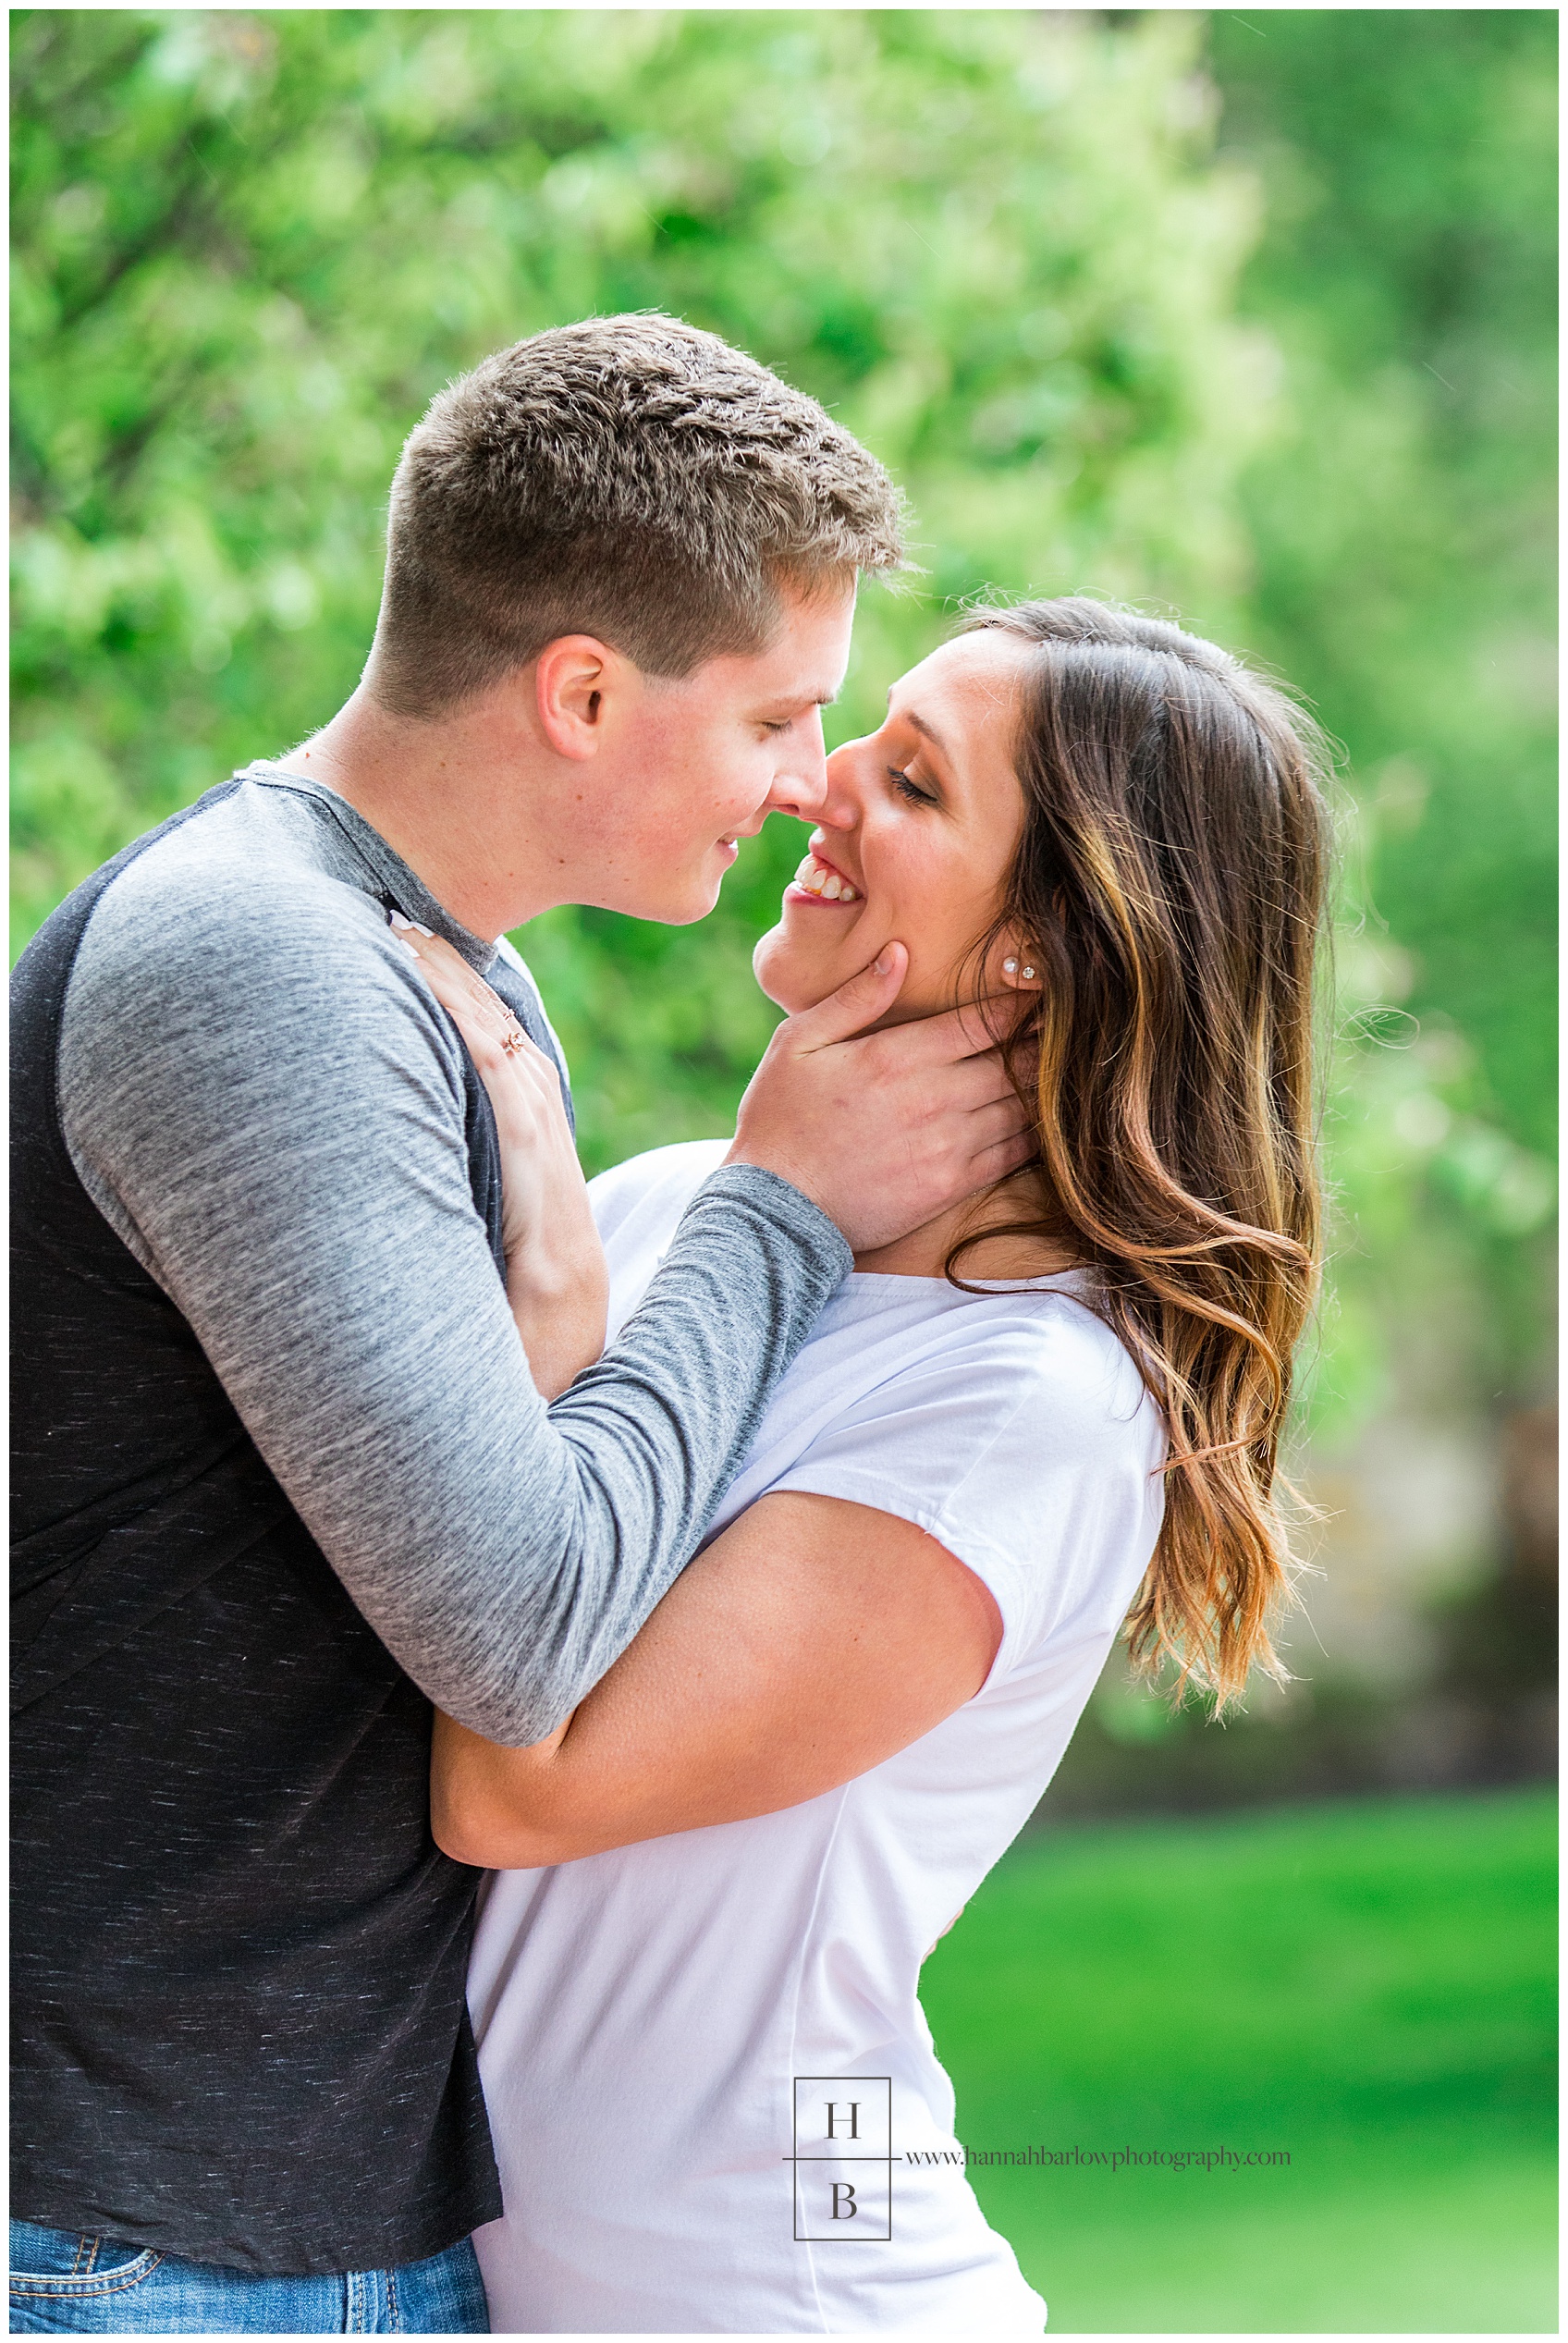 Engagement Photos with Spring Green Foliage